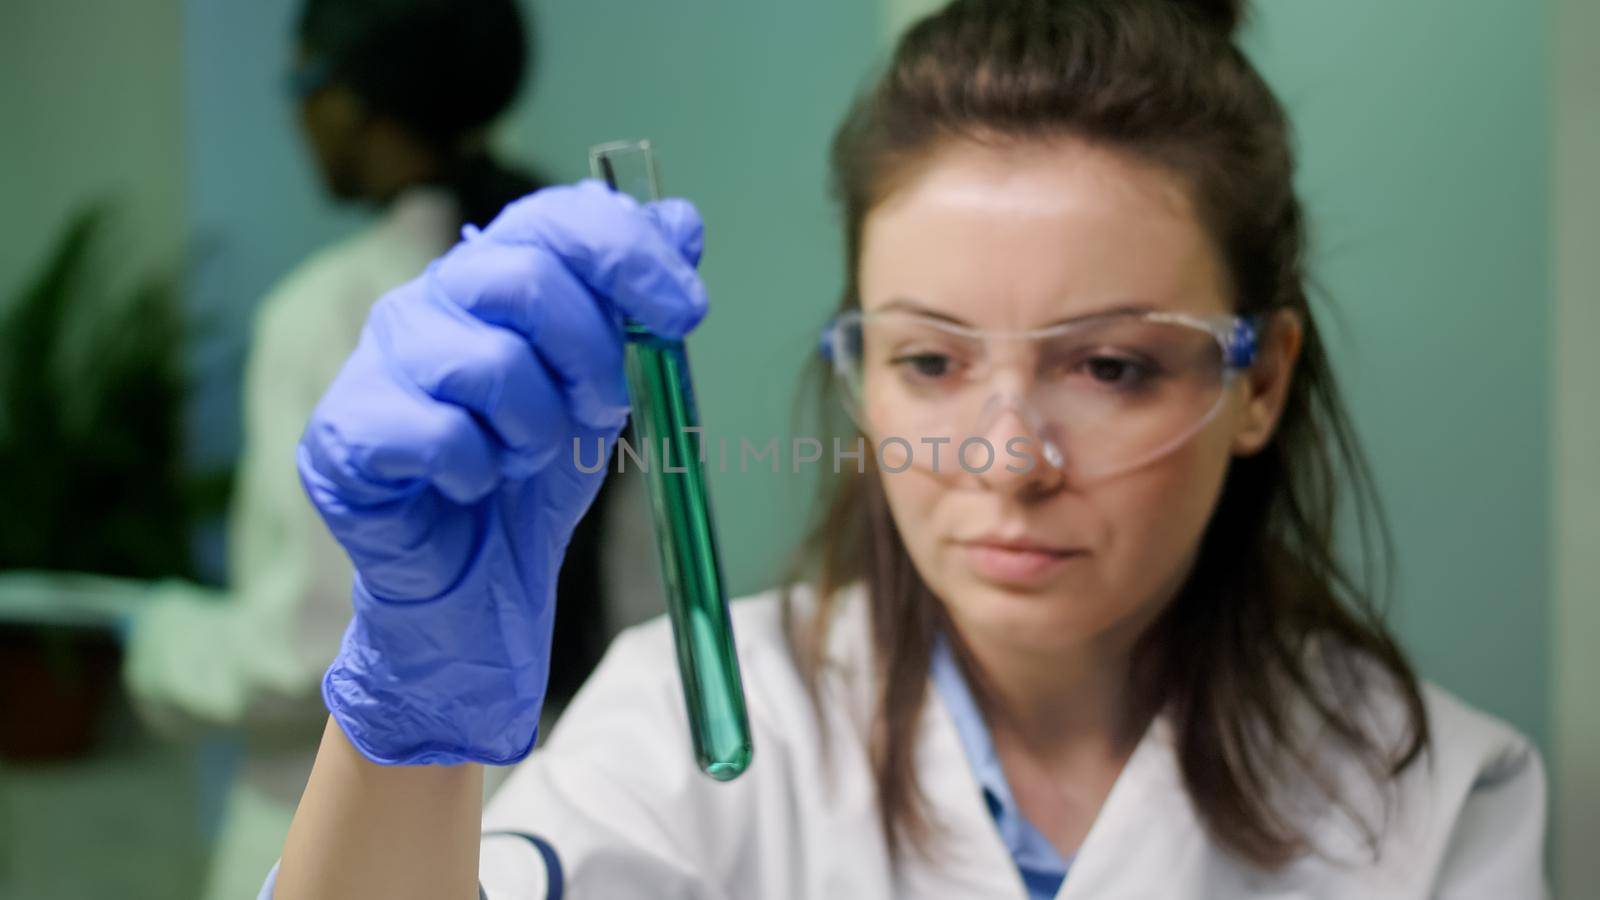 Chemist researcher woman holding test tube with dna liquid by DCStudio